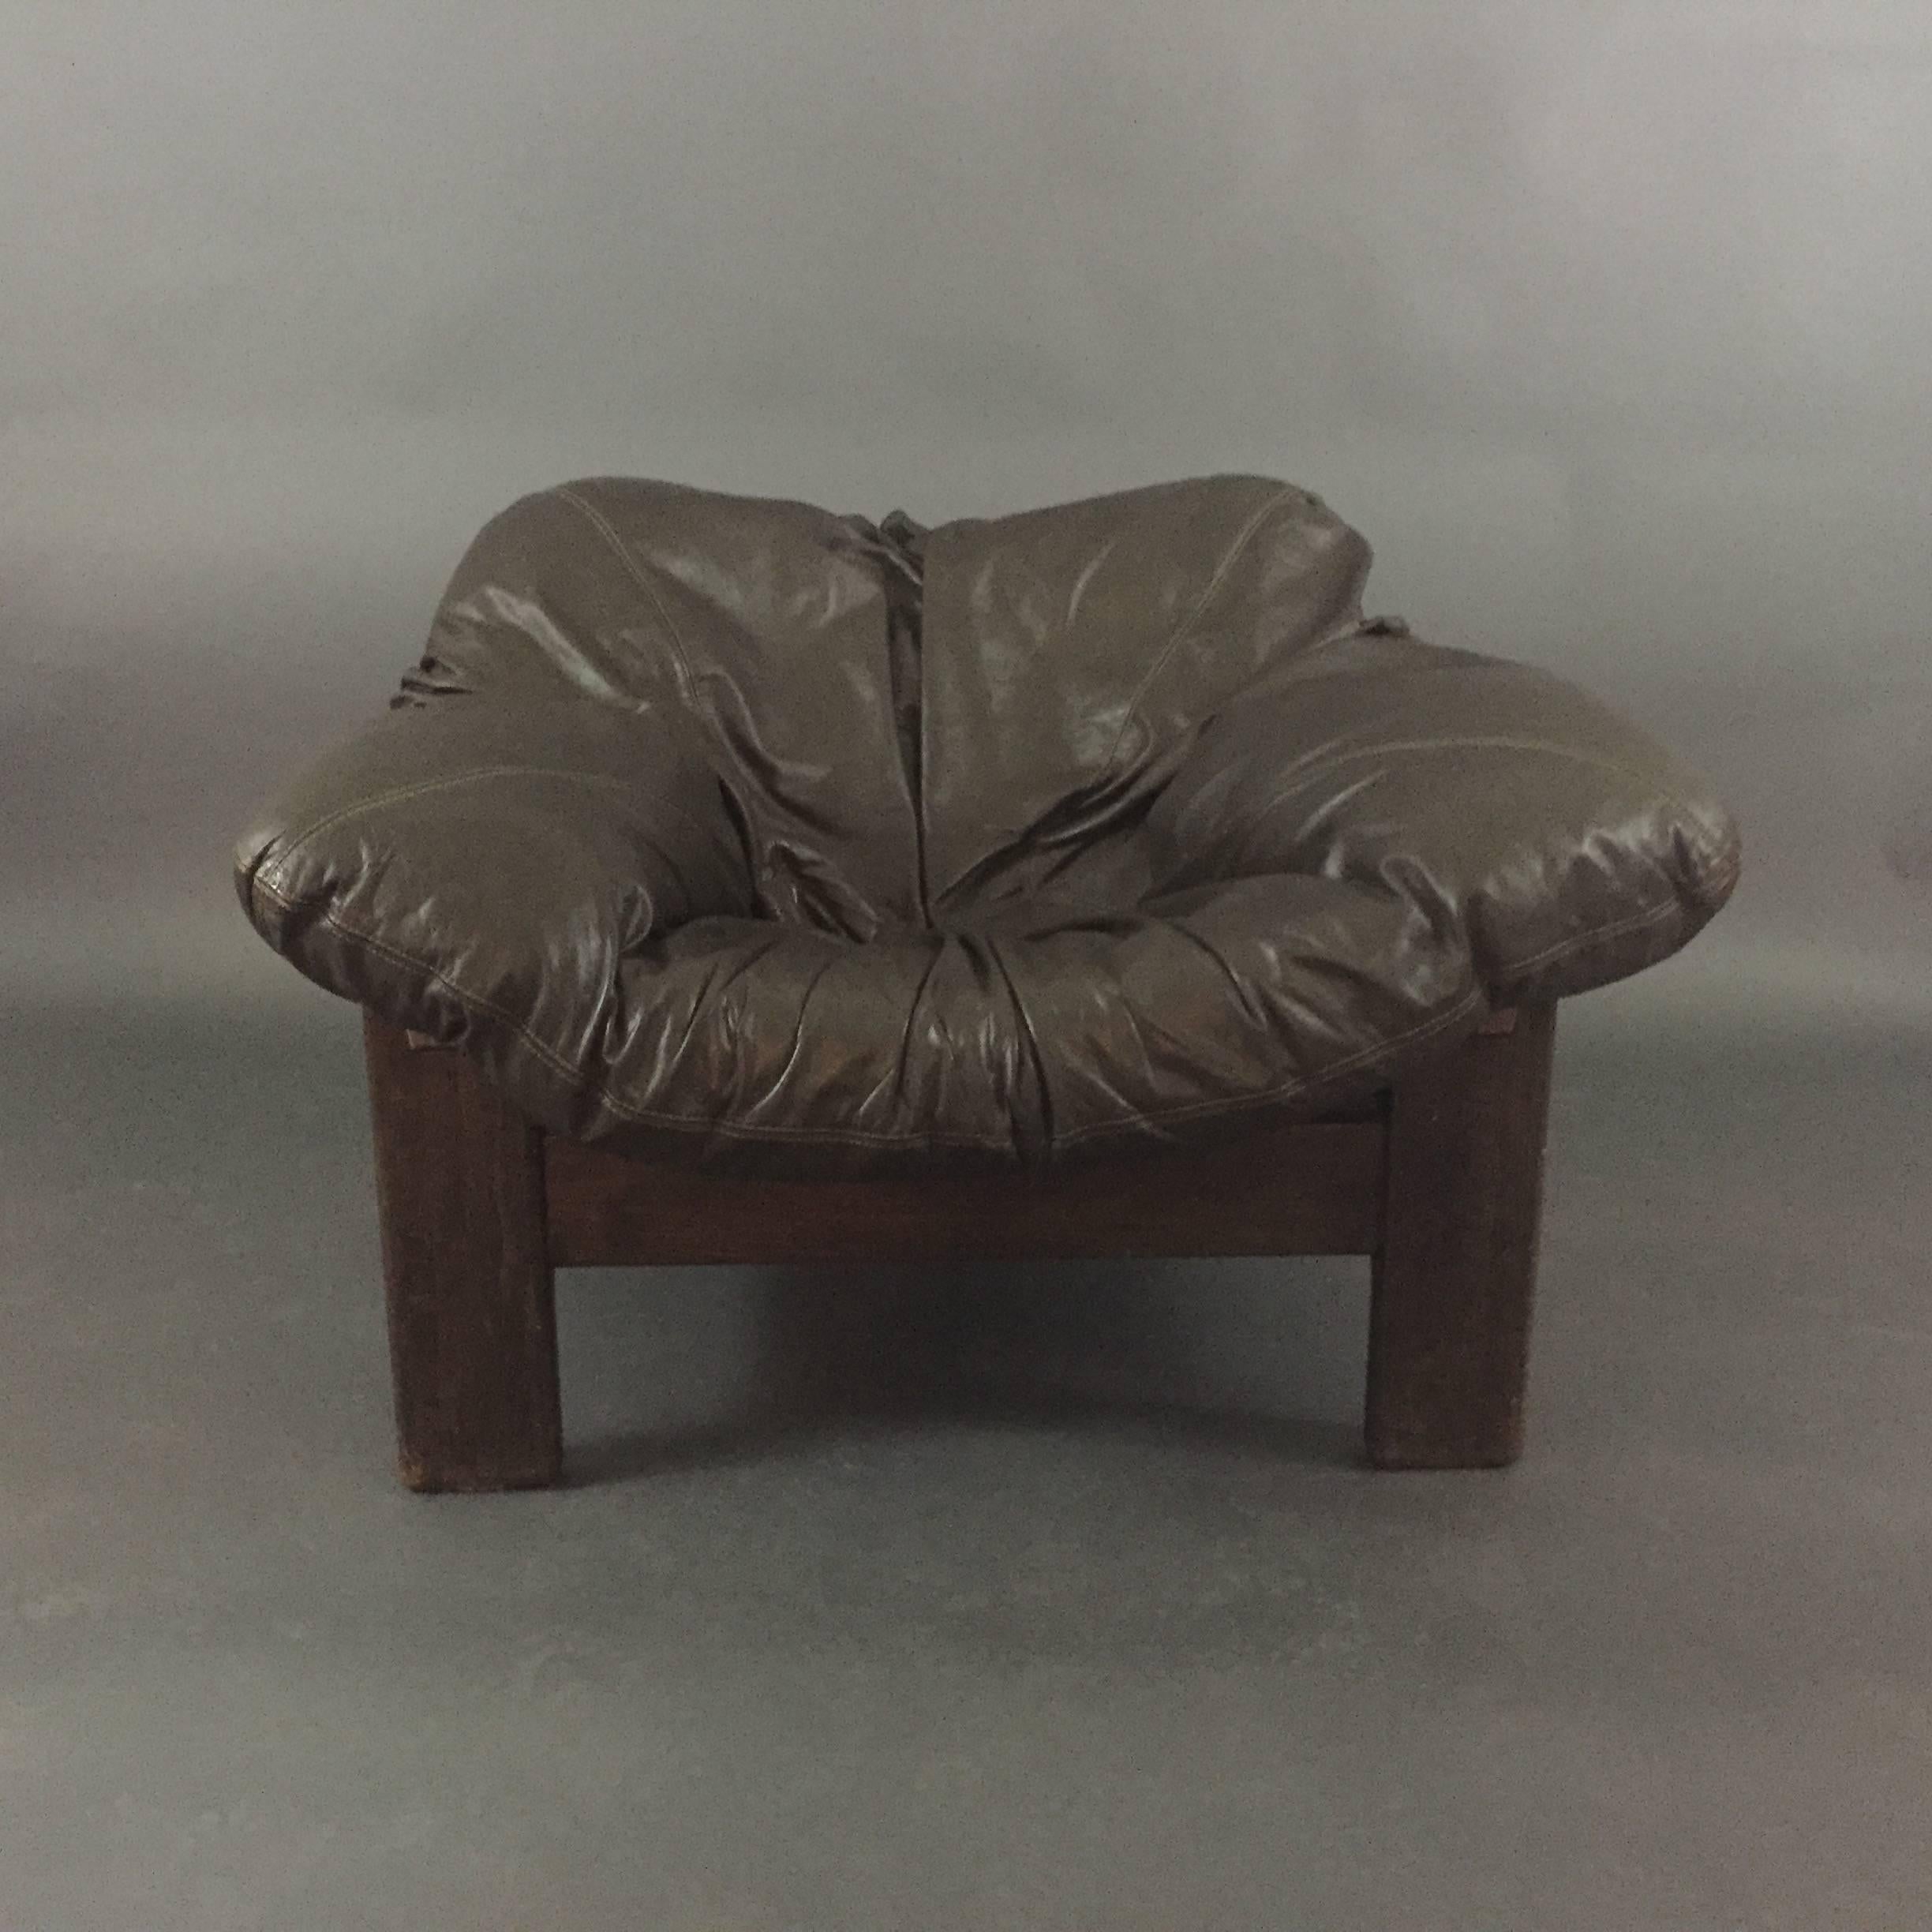 Dutch Leolux Netherlands Leather Glove Lounge Chair, 1970s For Sale